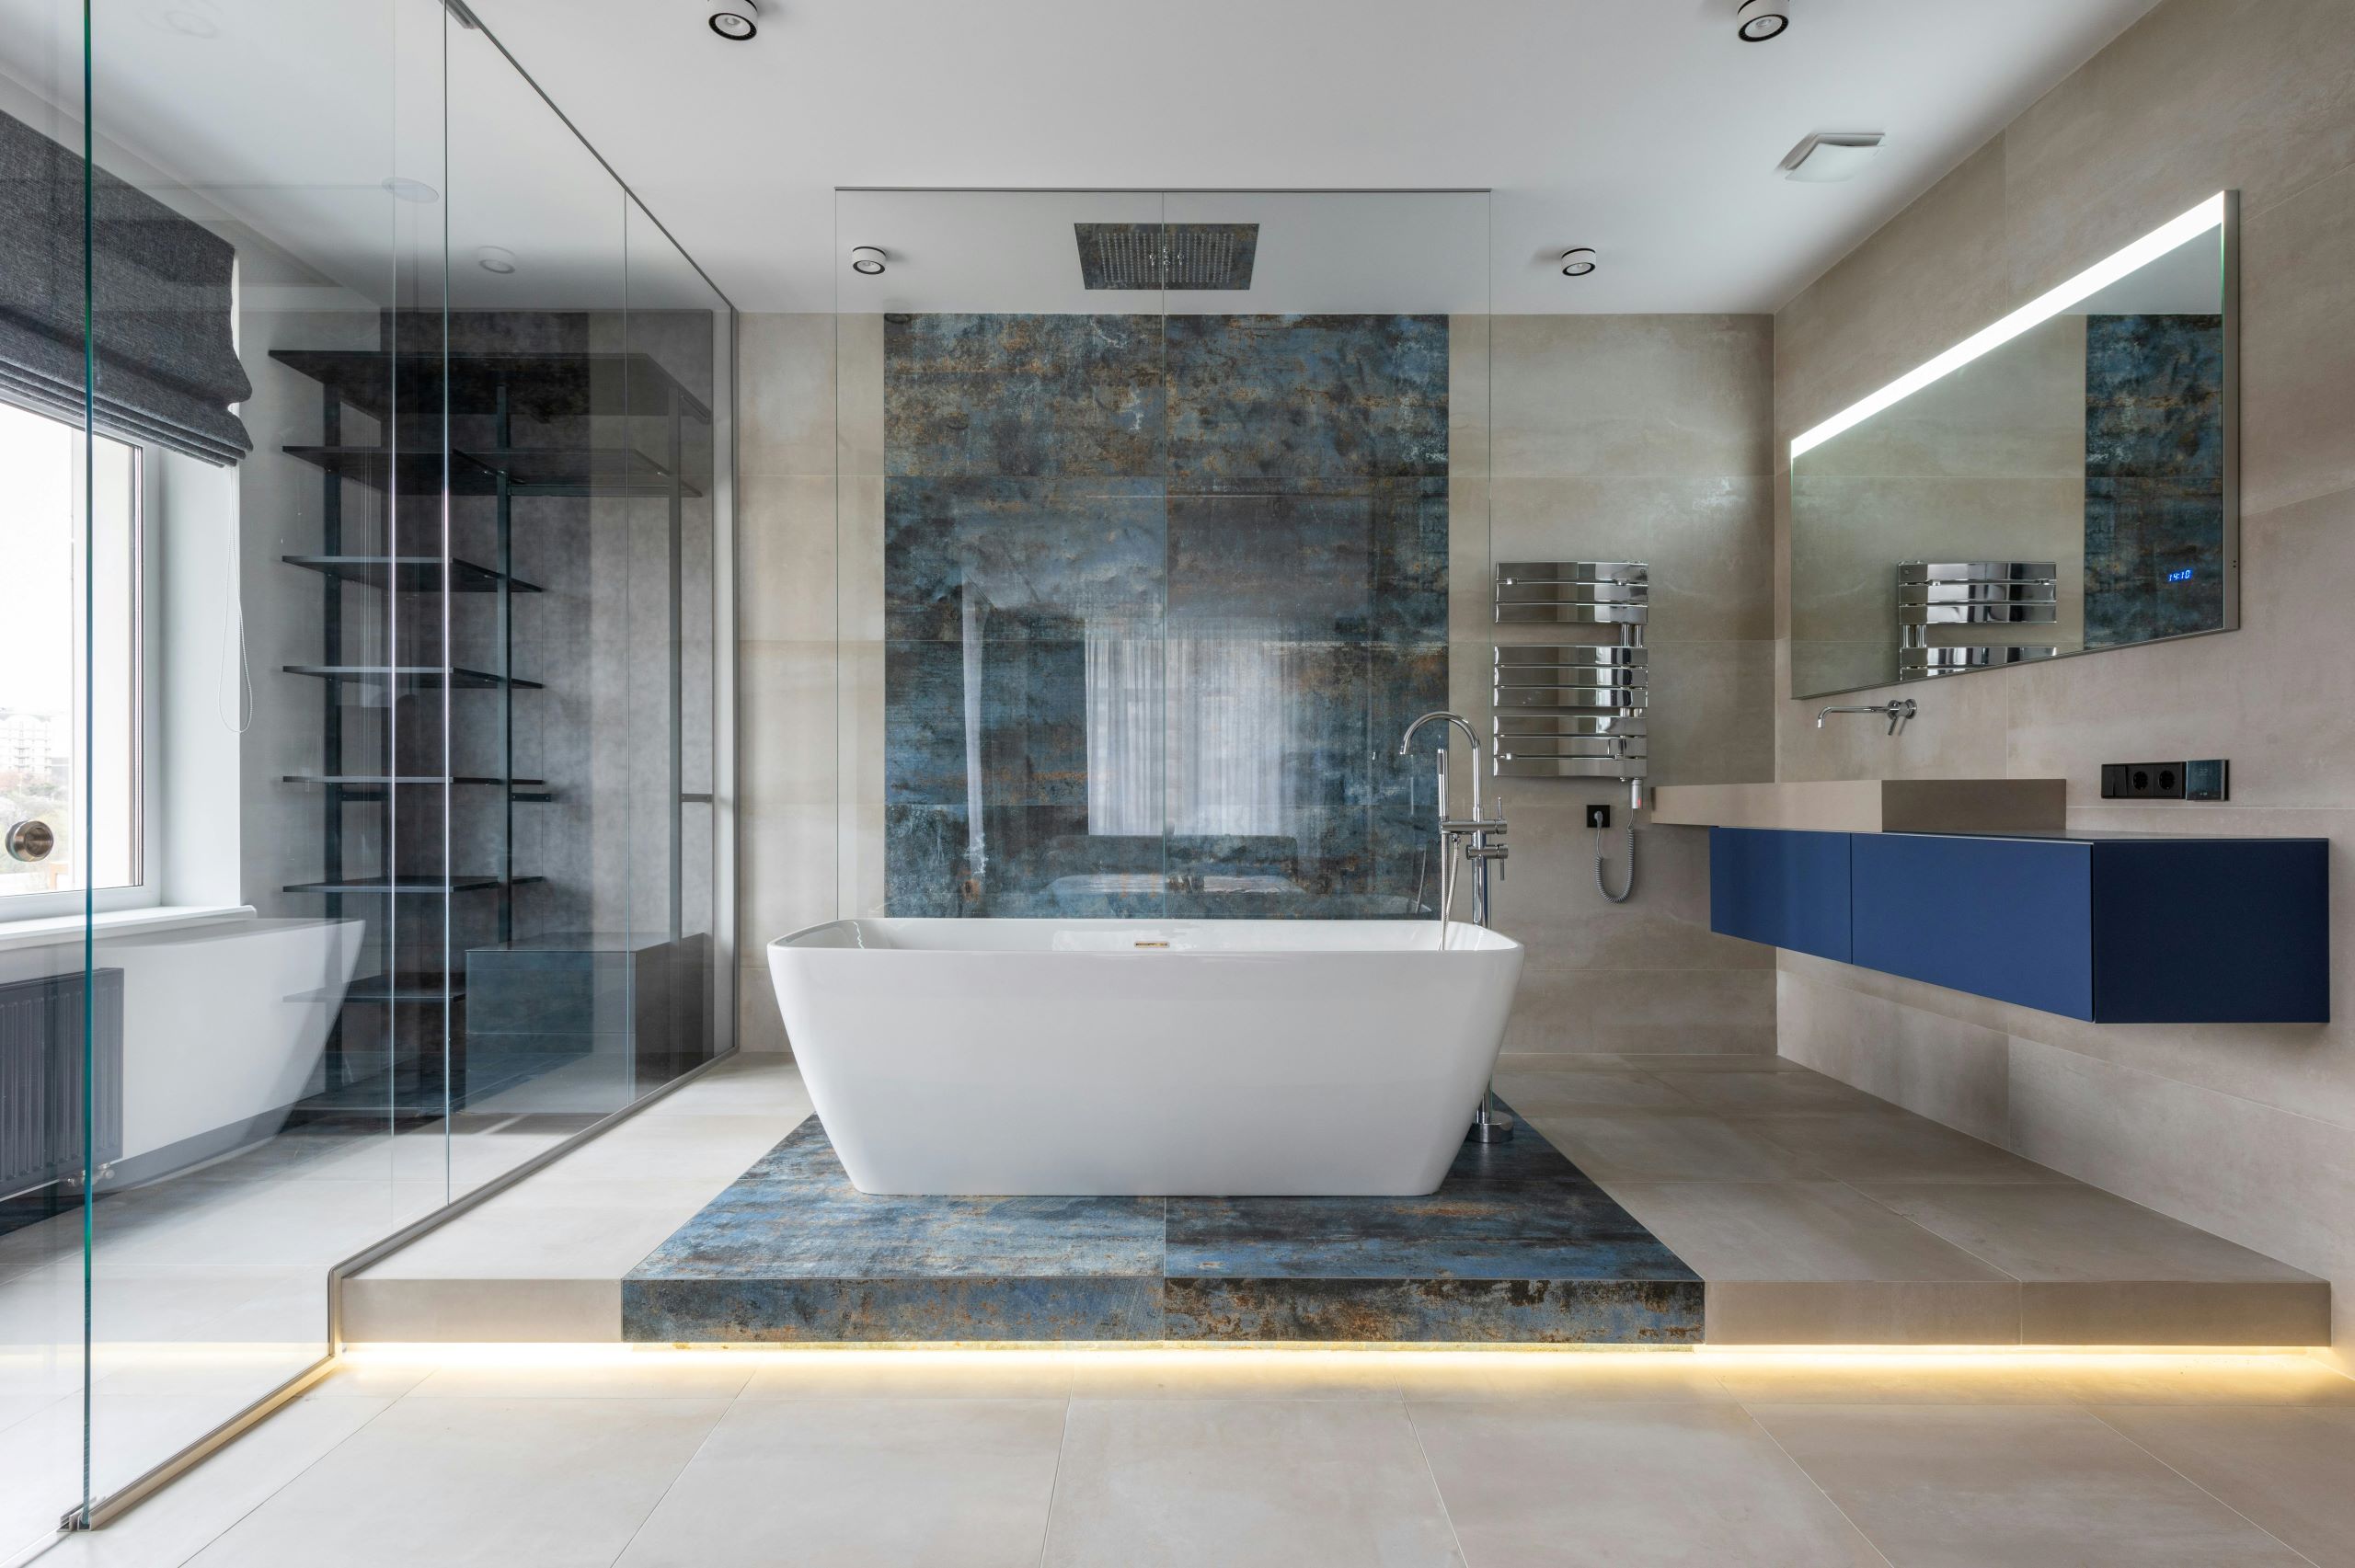 Modern and contemporary bathroom with soaker bathtub, walk-in shower, clean lines, glass and chrome accents